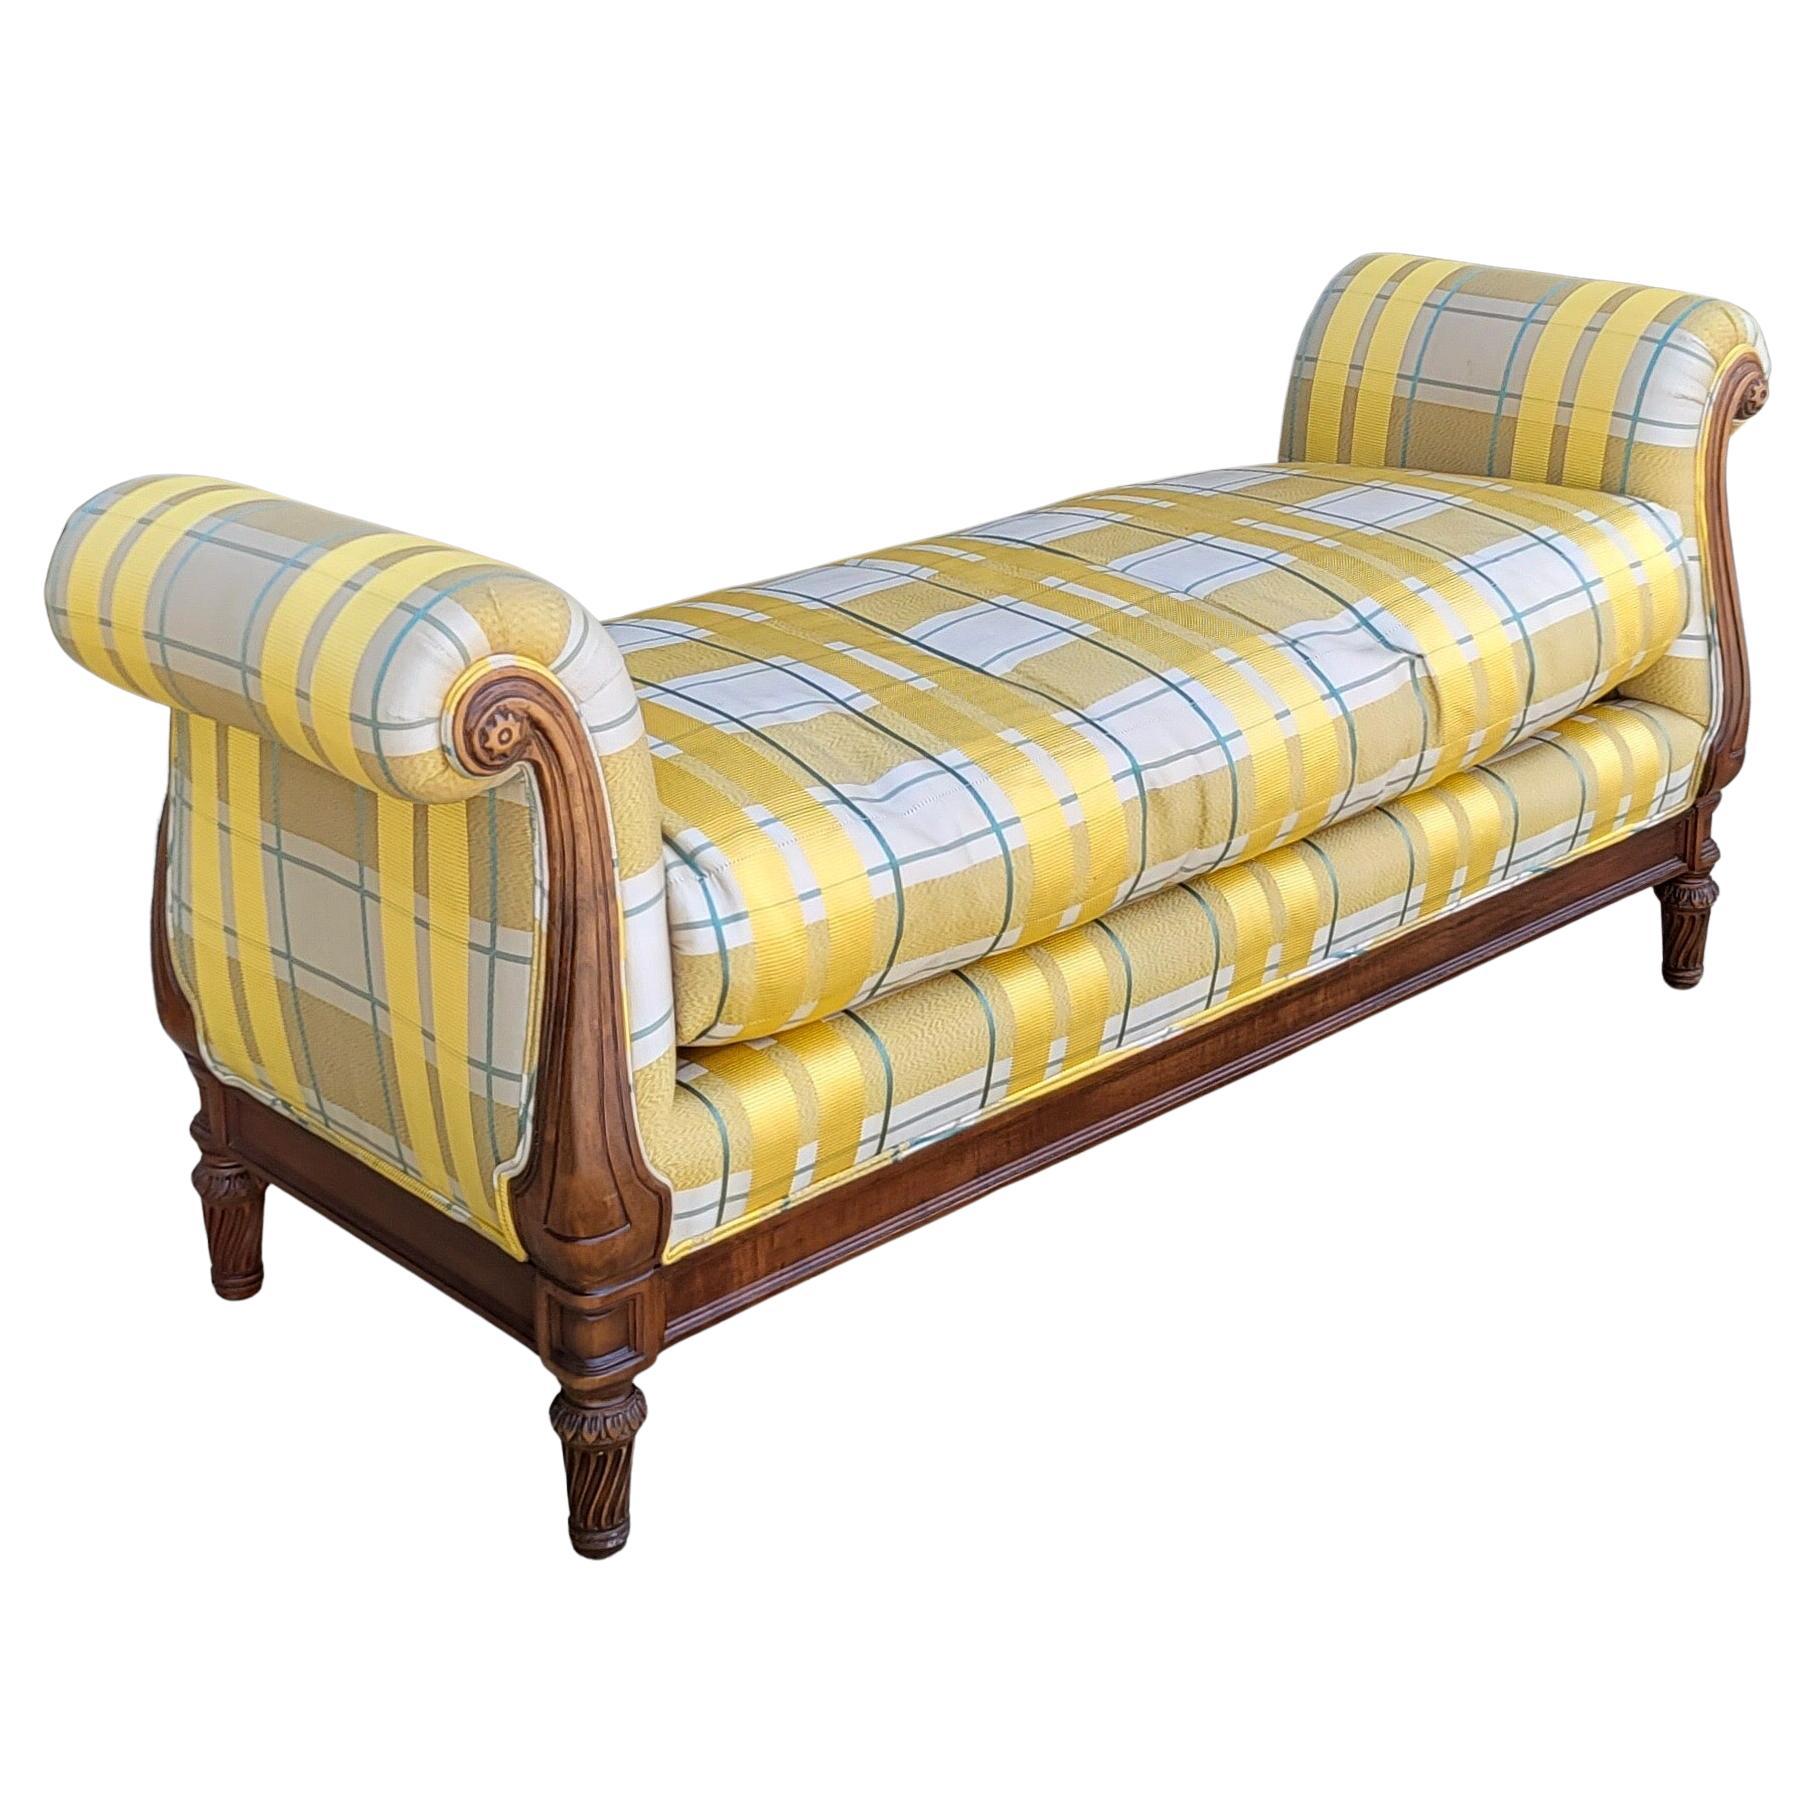 Late 20th-C. Regency Style Mahogany Upholstered Daybed / Bench / Chaise